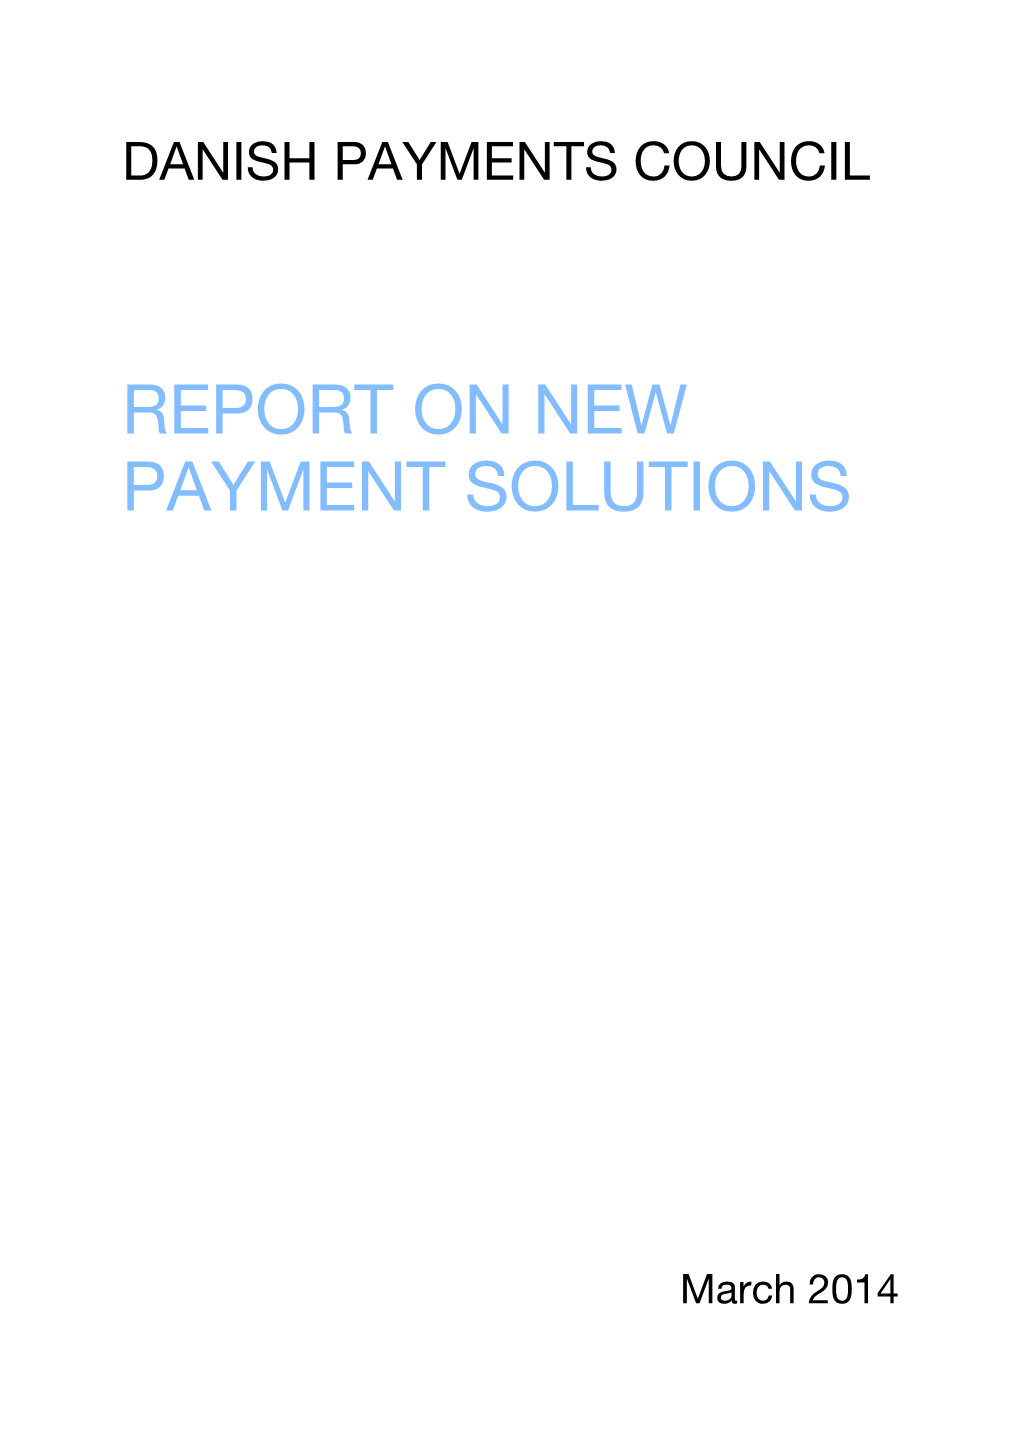 Report on New Payment Solutions